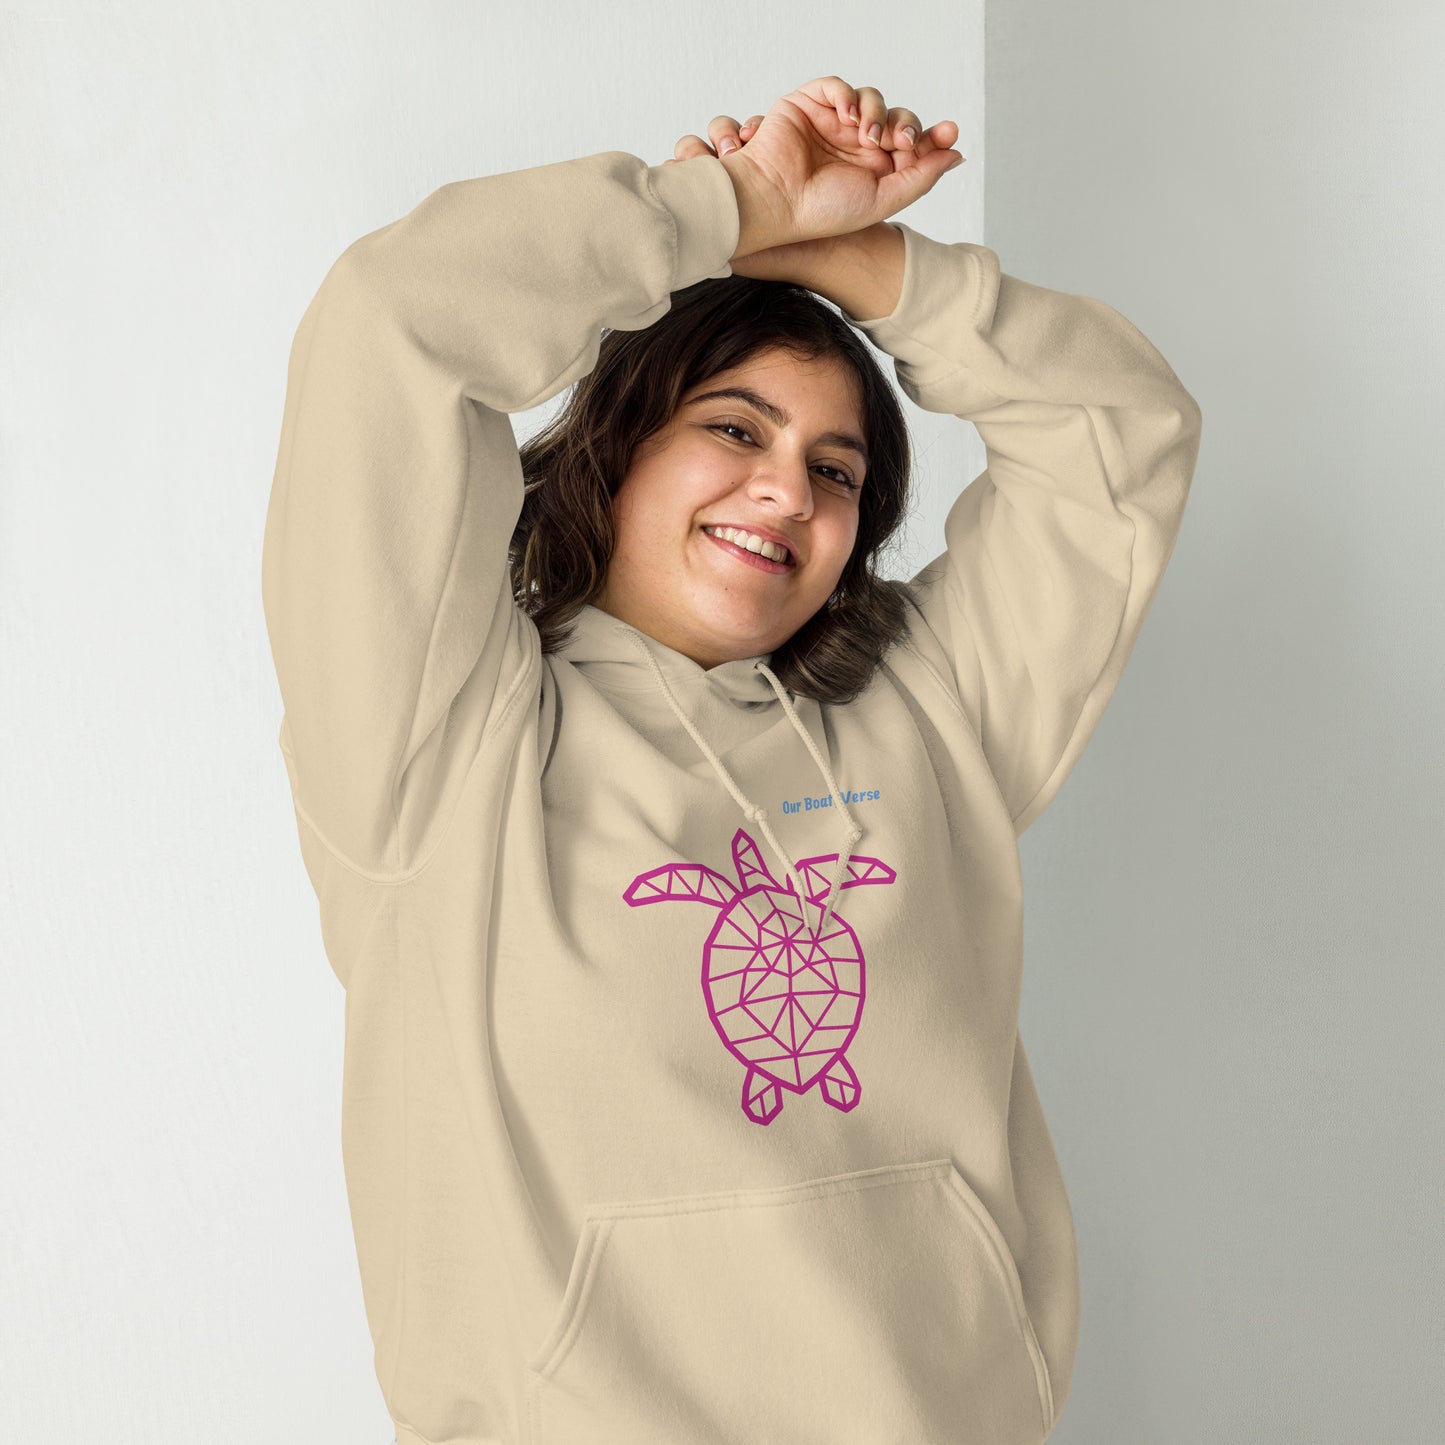 Turtle Love Hoodie by Our BoatyVerse